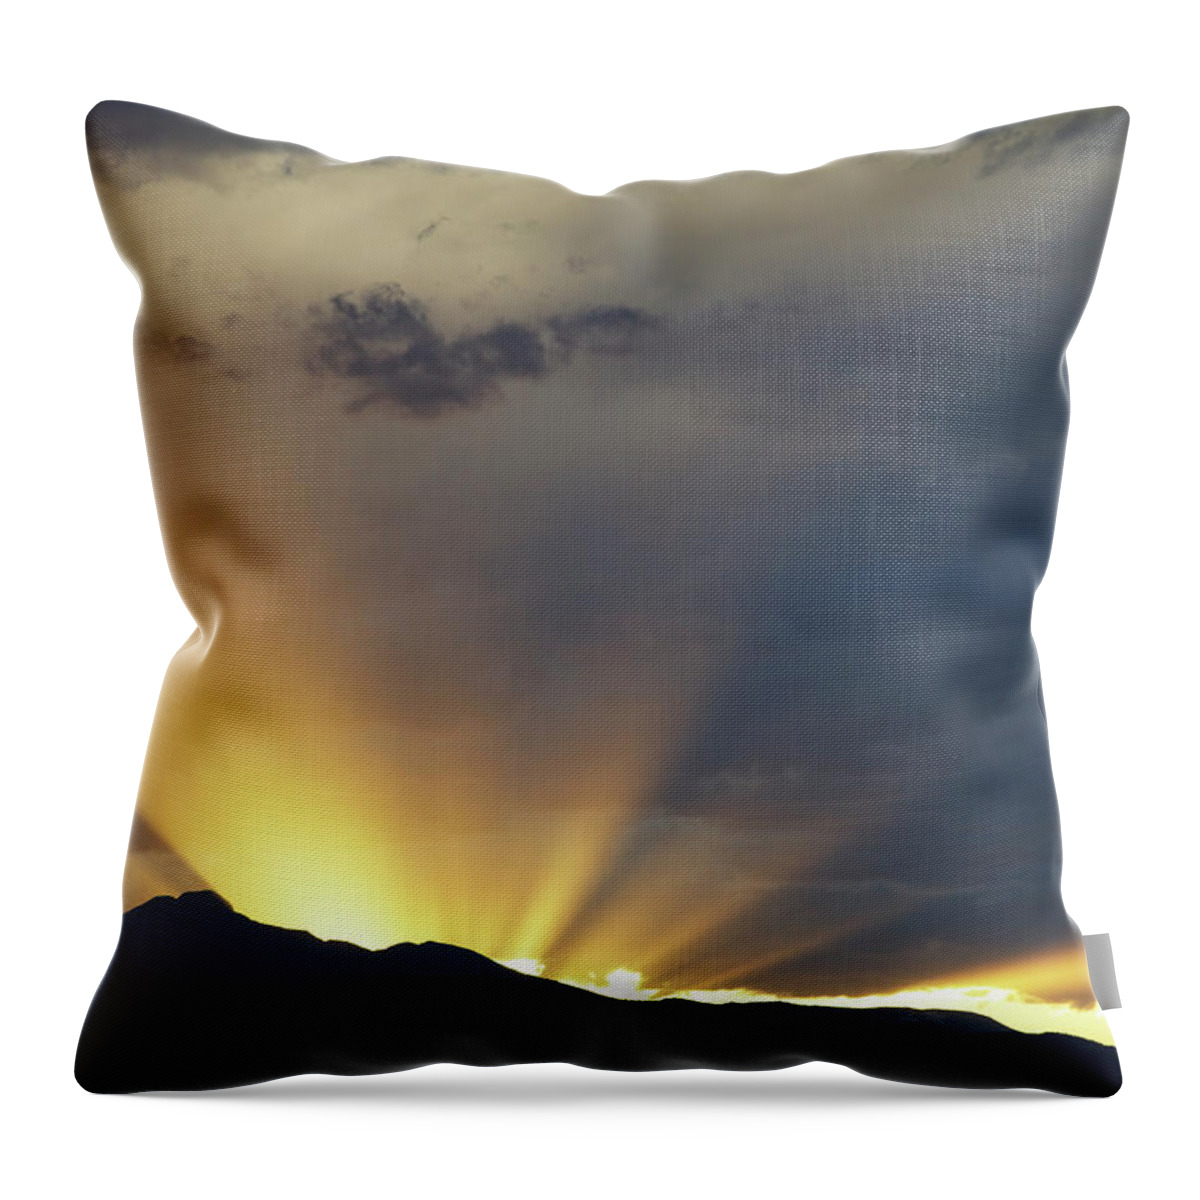 Thunderstorm Throw Pillow featuring the photograph Dramatic Rocky Mountain Sunset by Beklaus